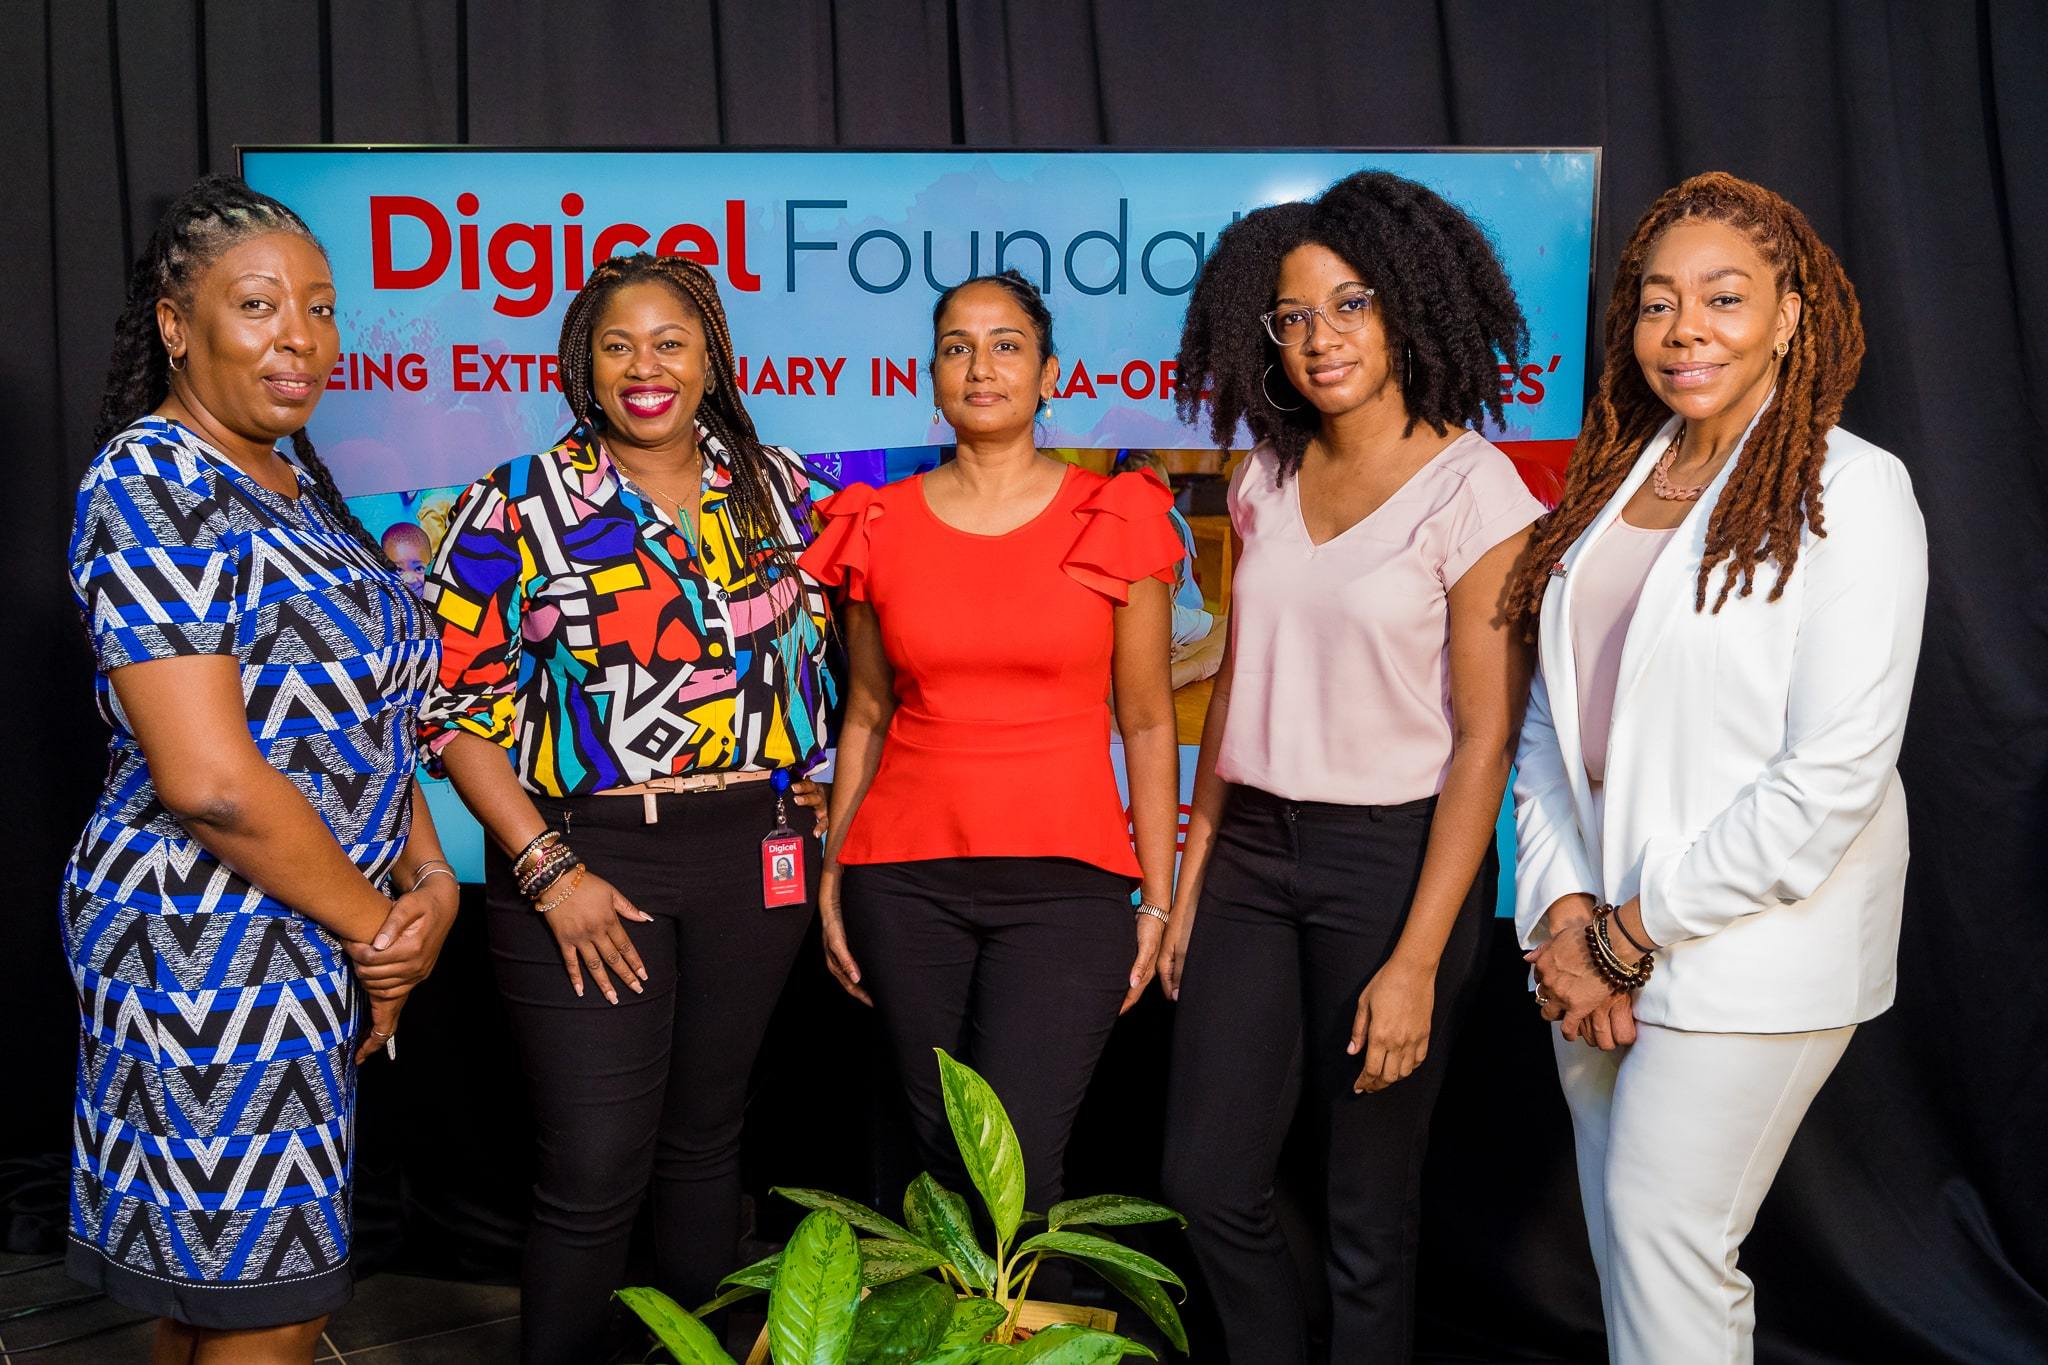 Leaders from the Digicel Trinidad and Tobago Foundation